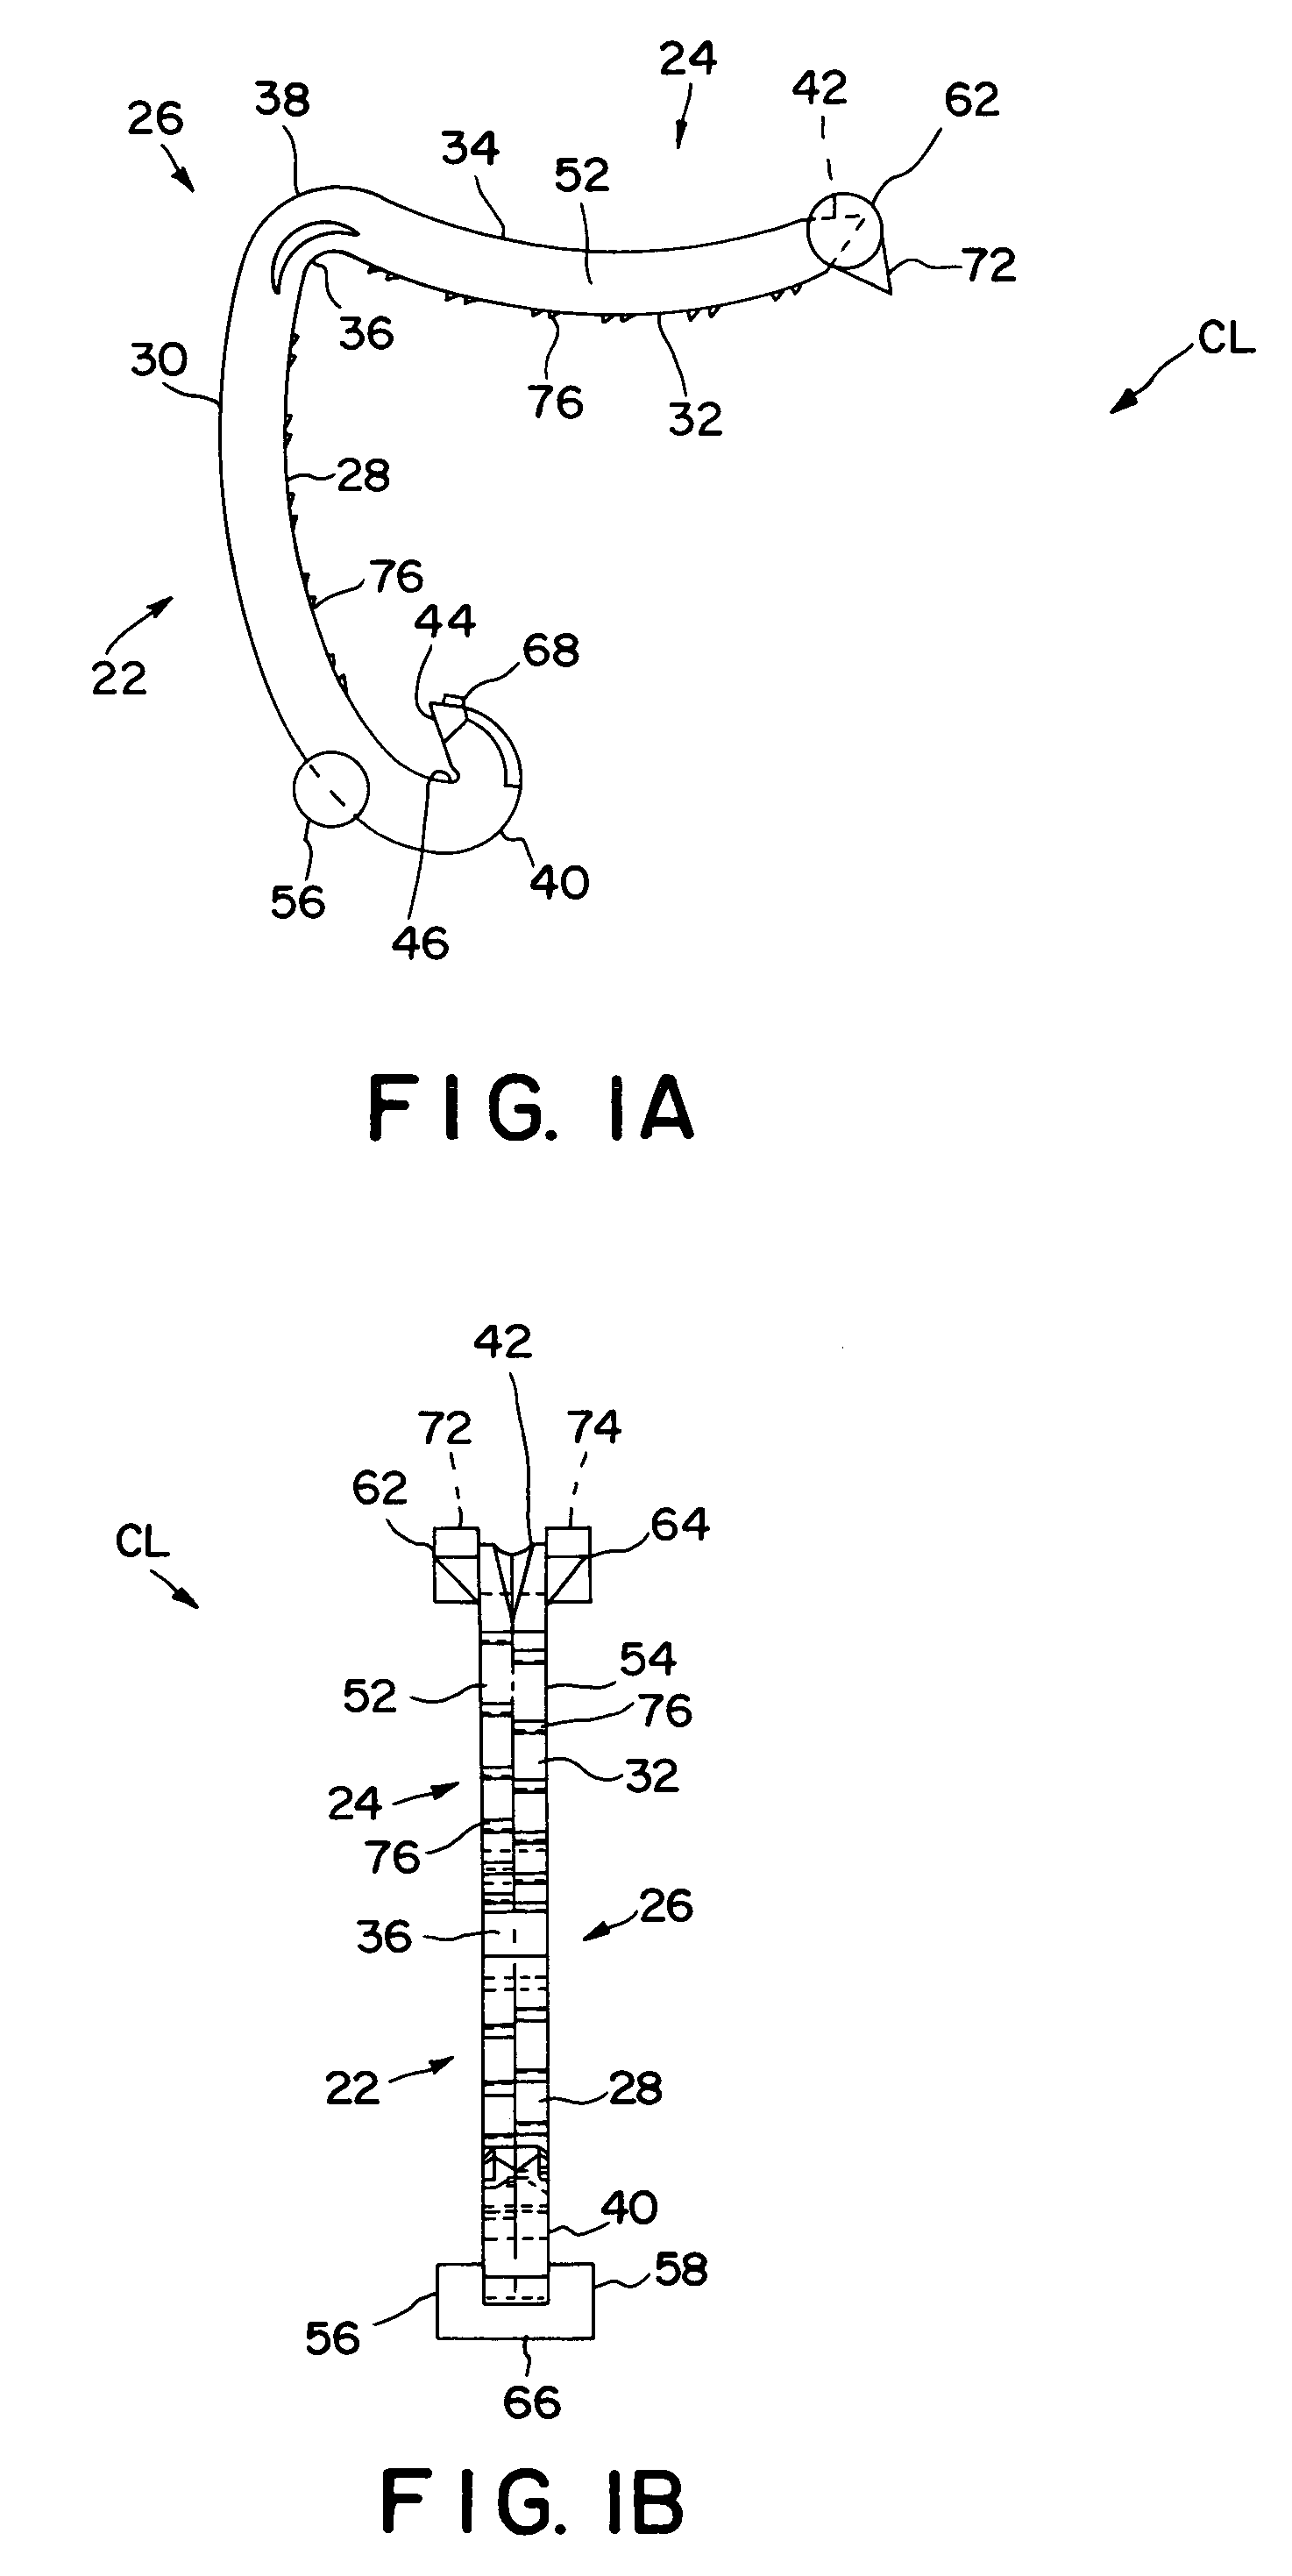 Automated-feed surgical clip applier and related methods